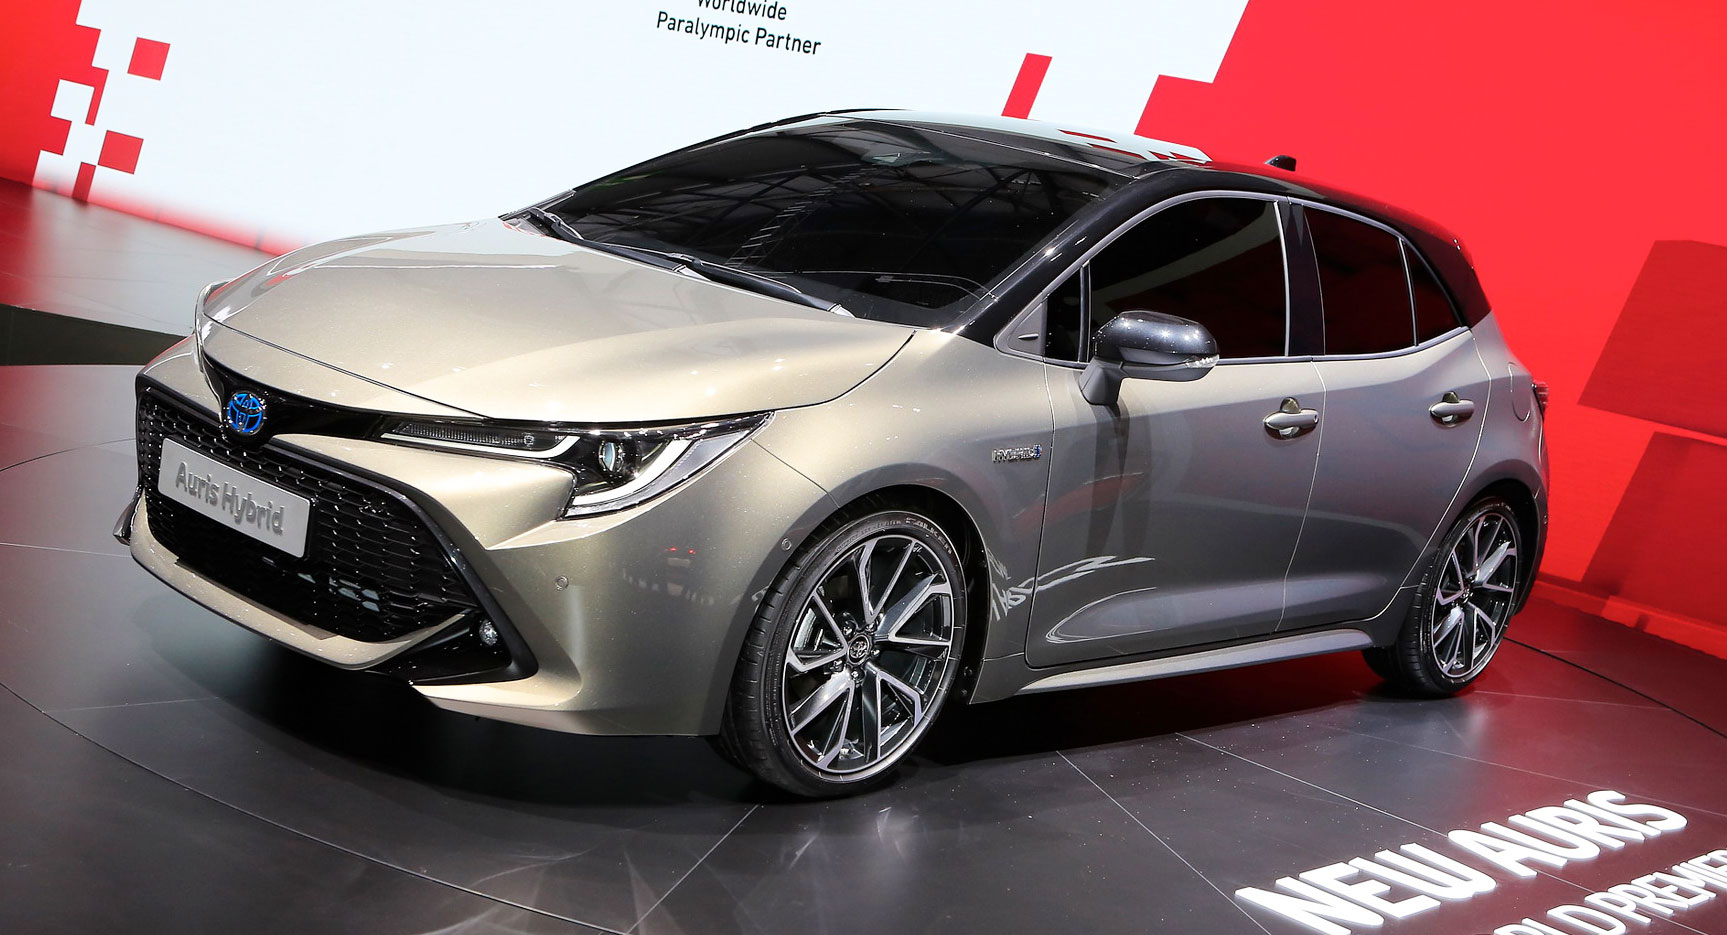 The new Toyota Auris is here